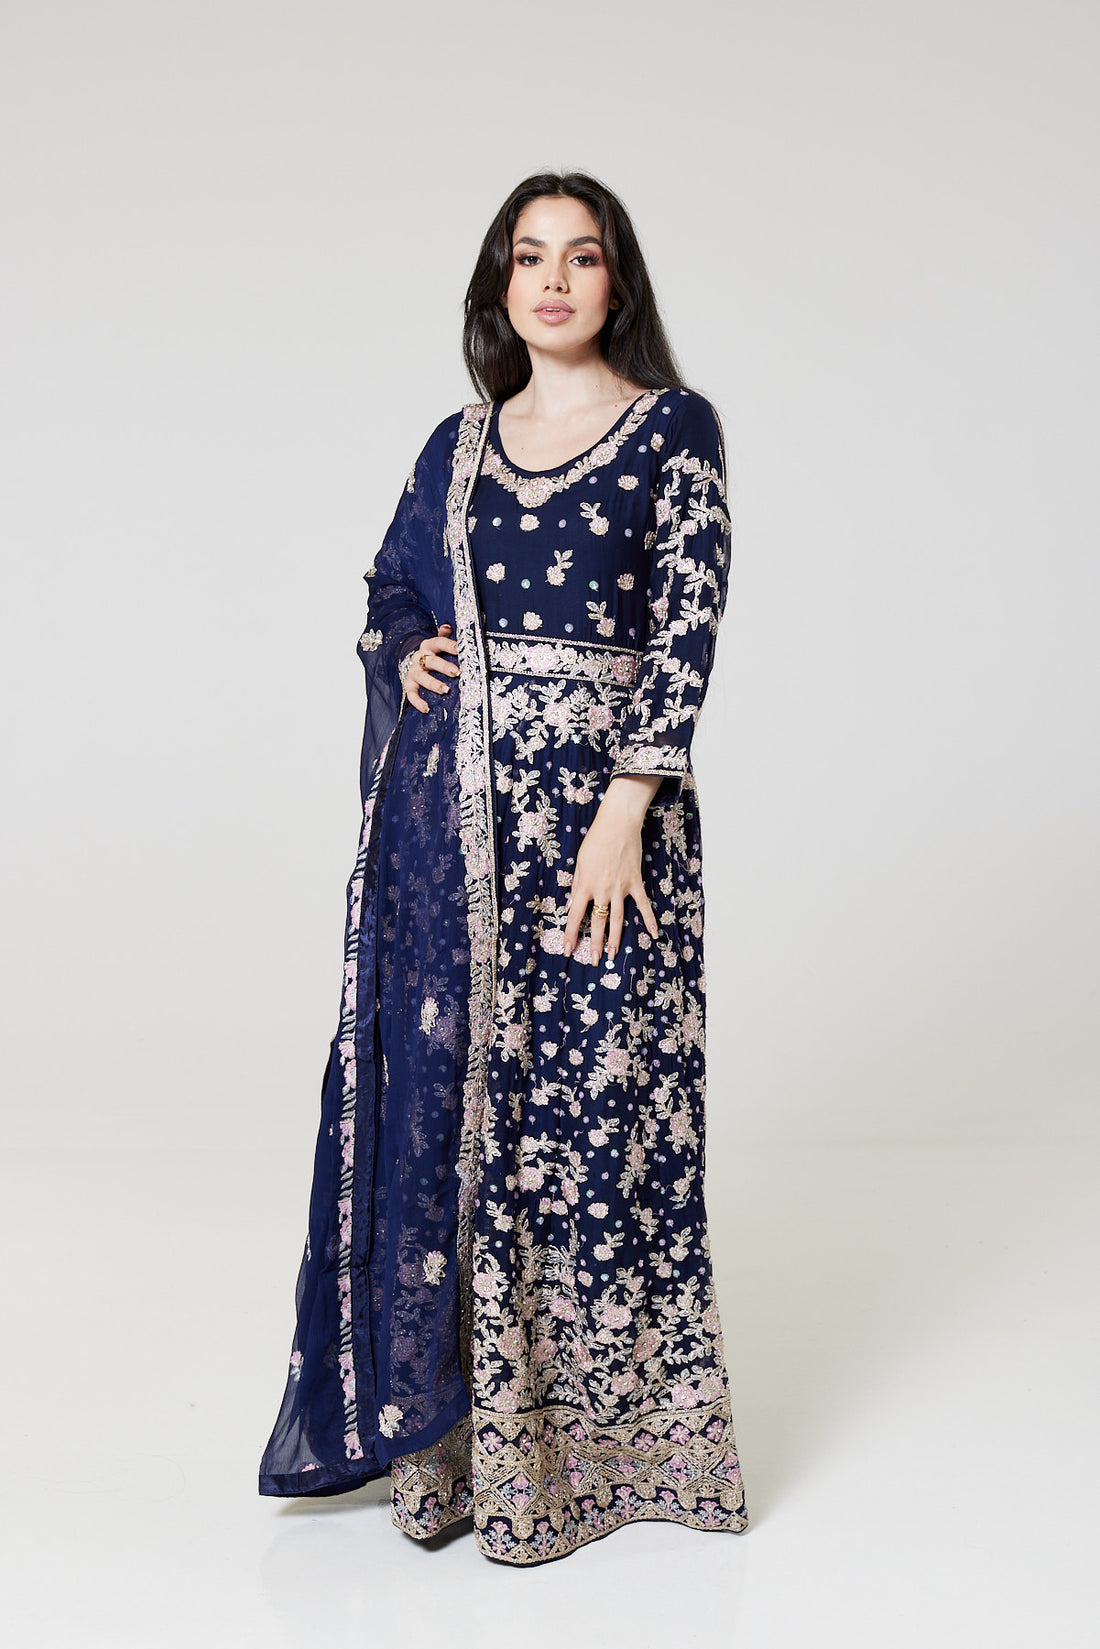 Navy Blue Embroidered Chiffon Suit NB1652